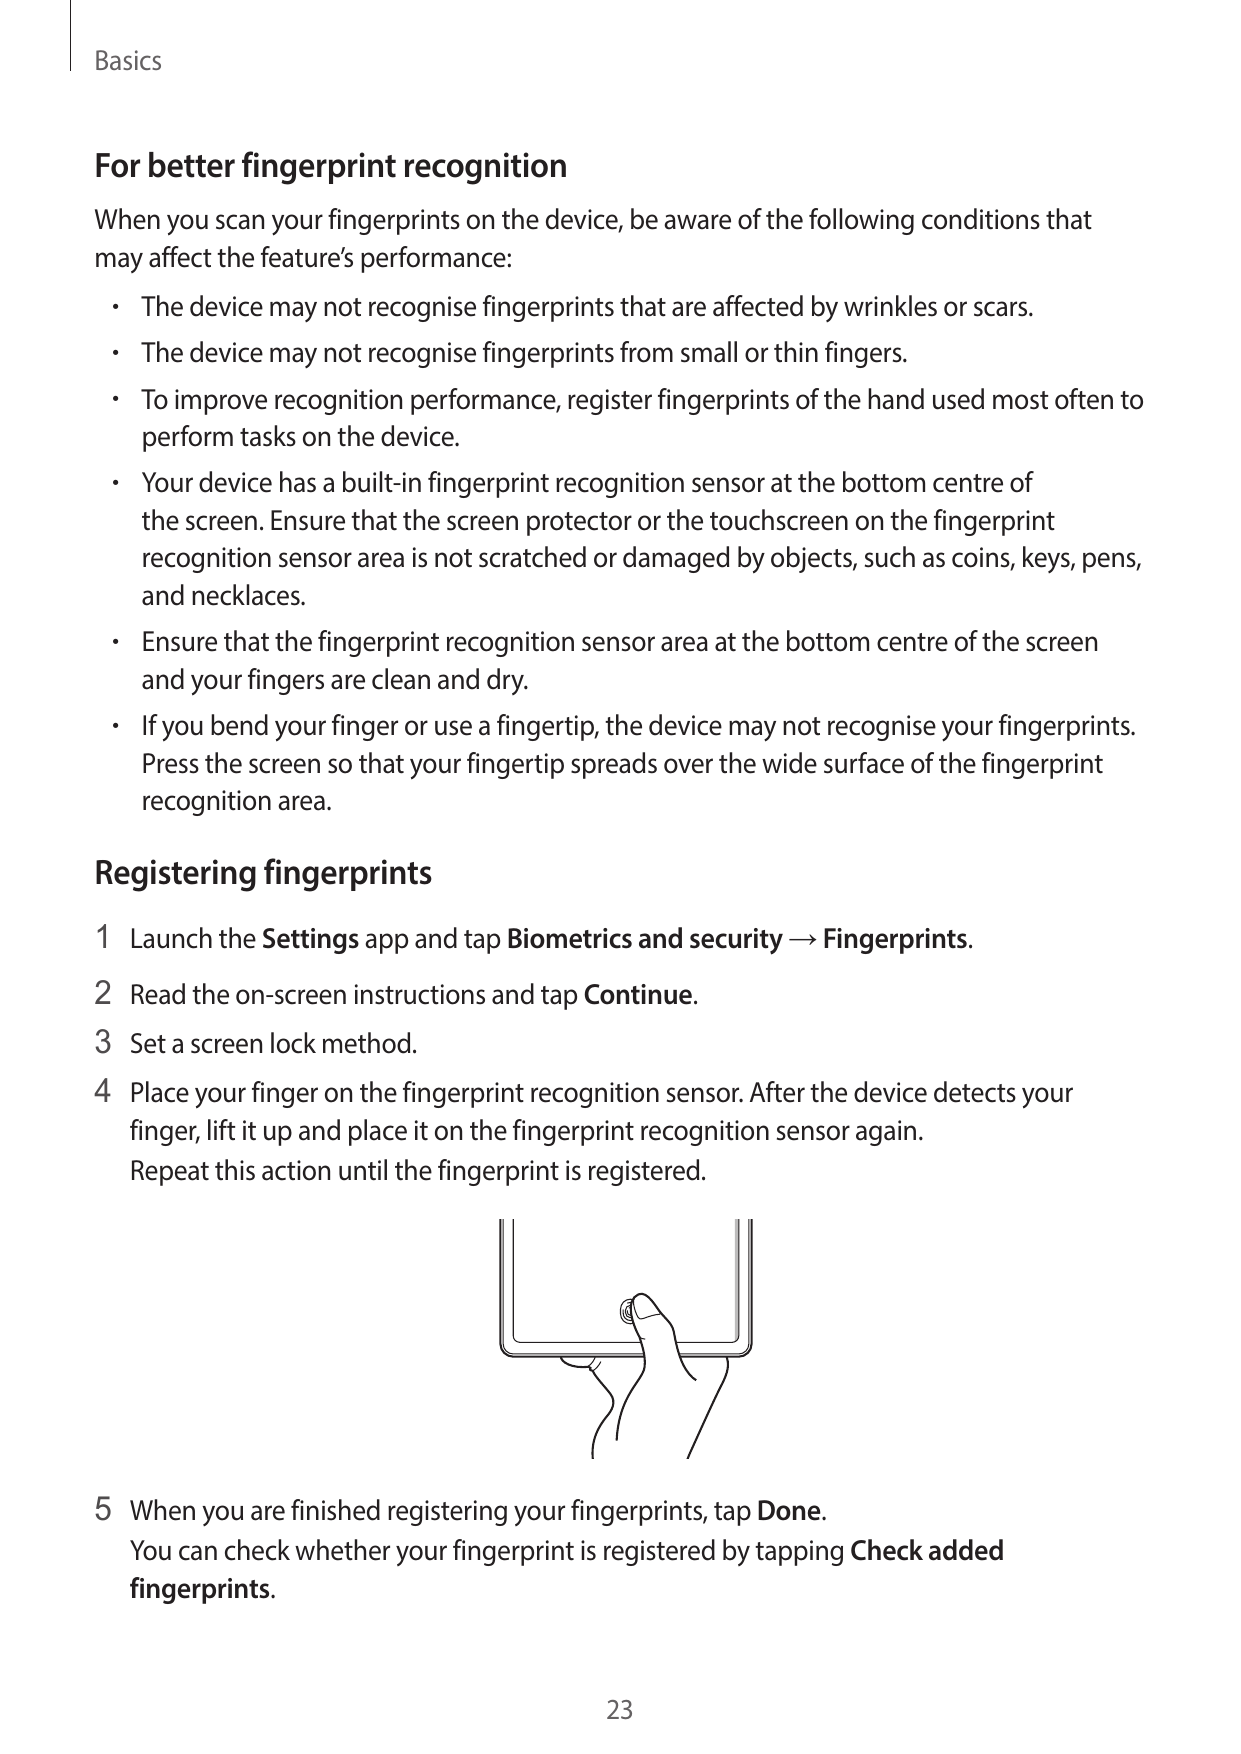 BasicsFor better fingerprint recognitionWhen you scan your fingerprints on the device, be aware of the following conditions that